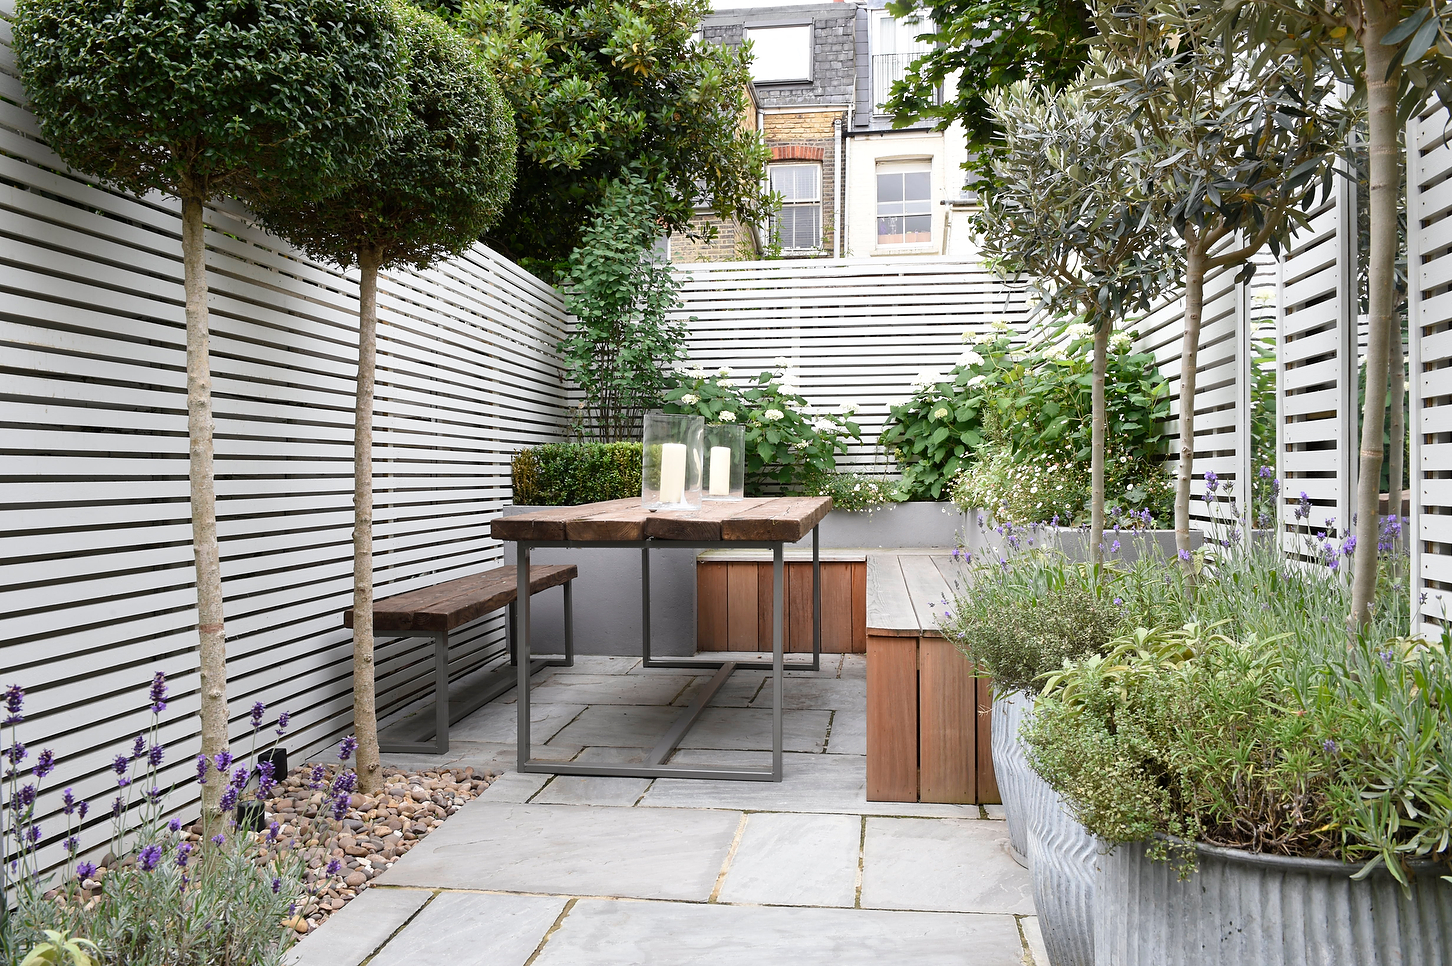 9 small garden fence ideas to add style to compact spaces | Livingetc